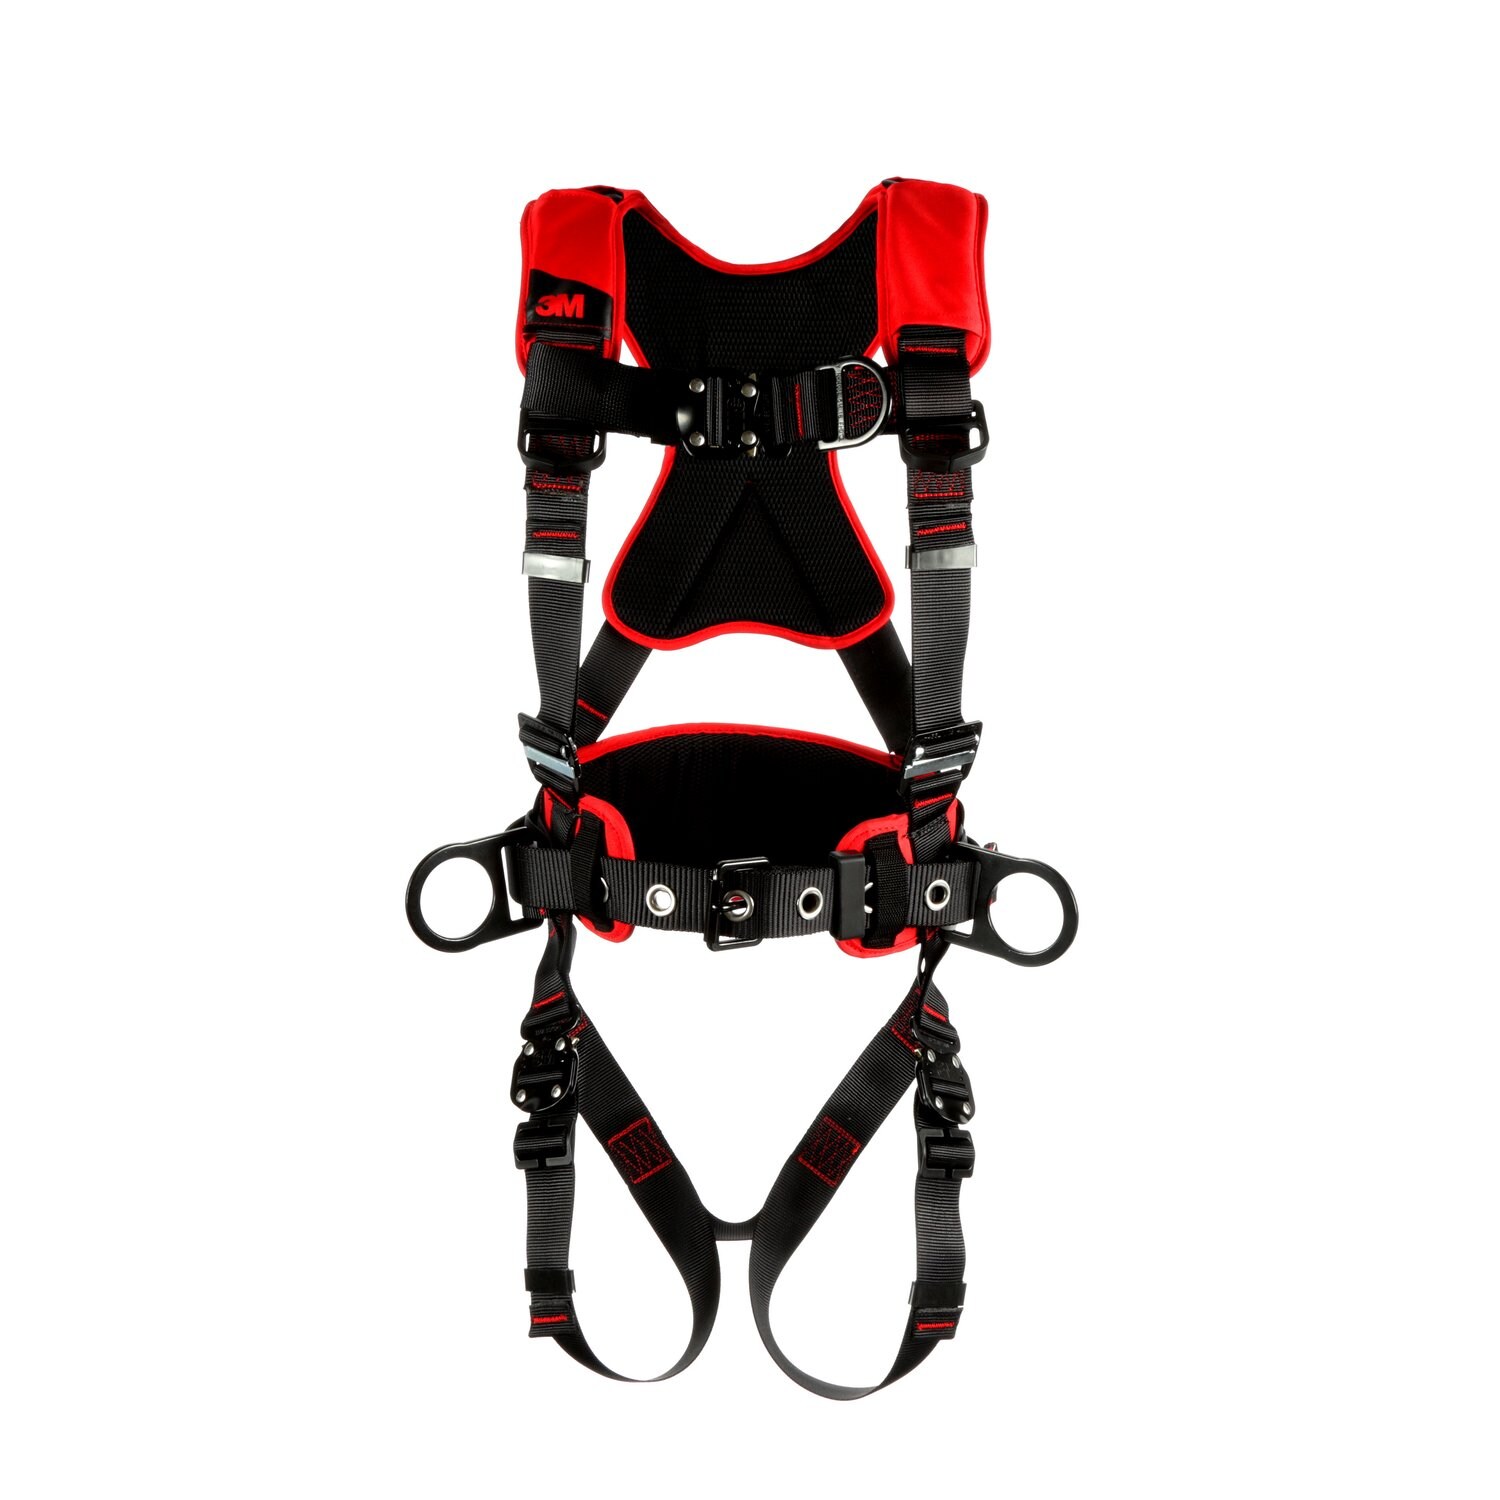 7012816621 - 3M Protecta P200 Comfort Construction Climbing/Positioning Safety Harness 1161220, Small